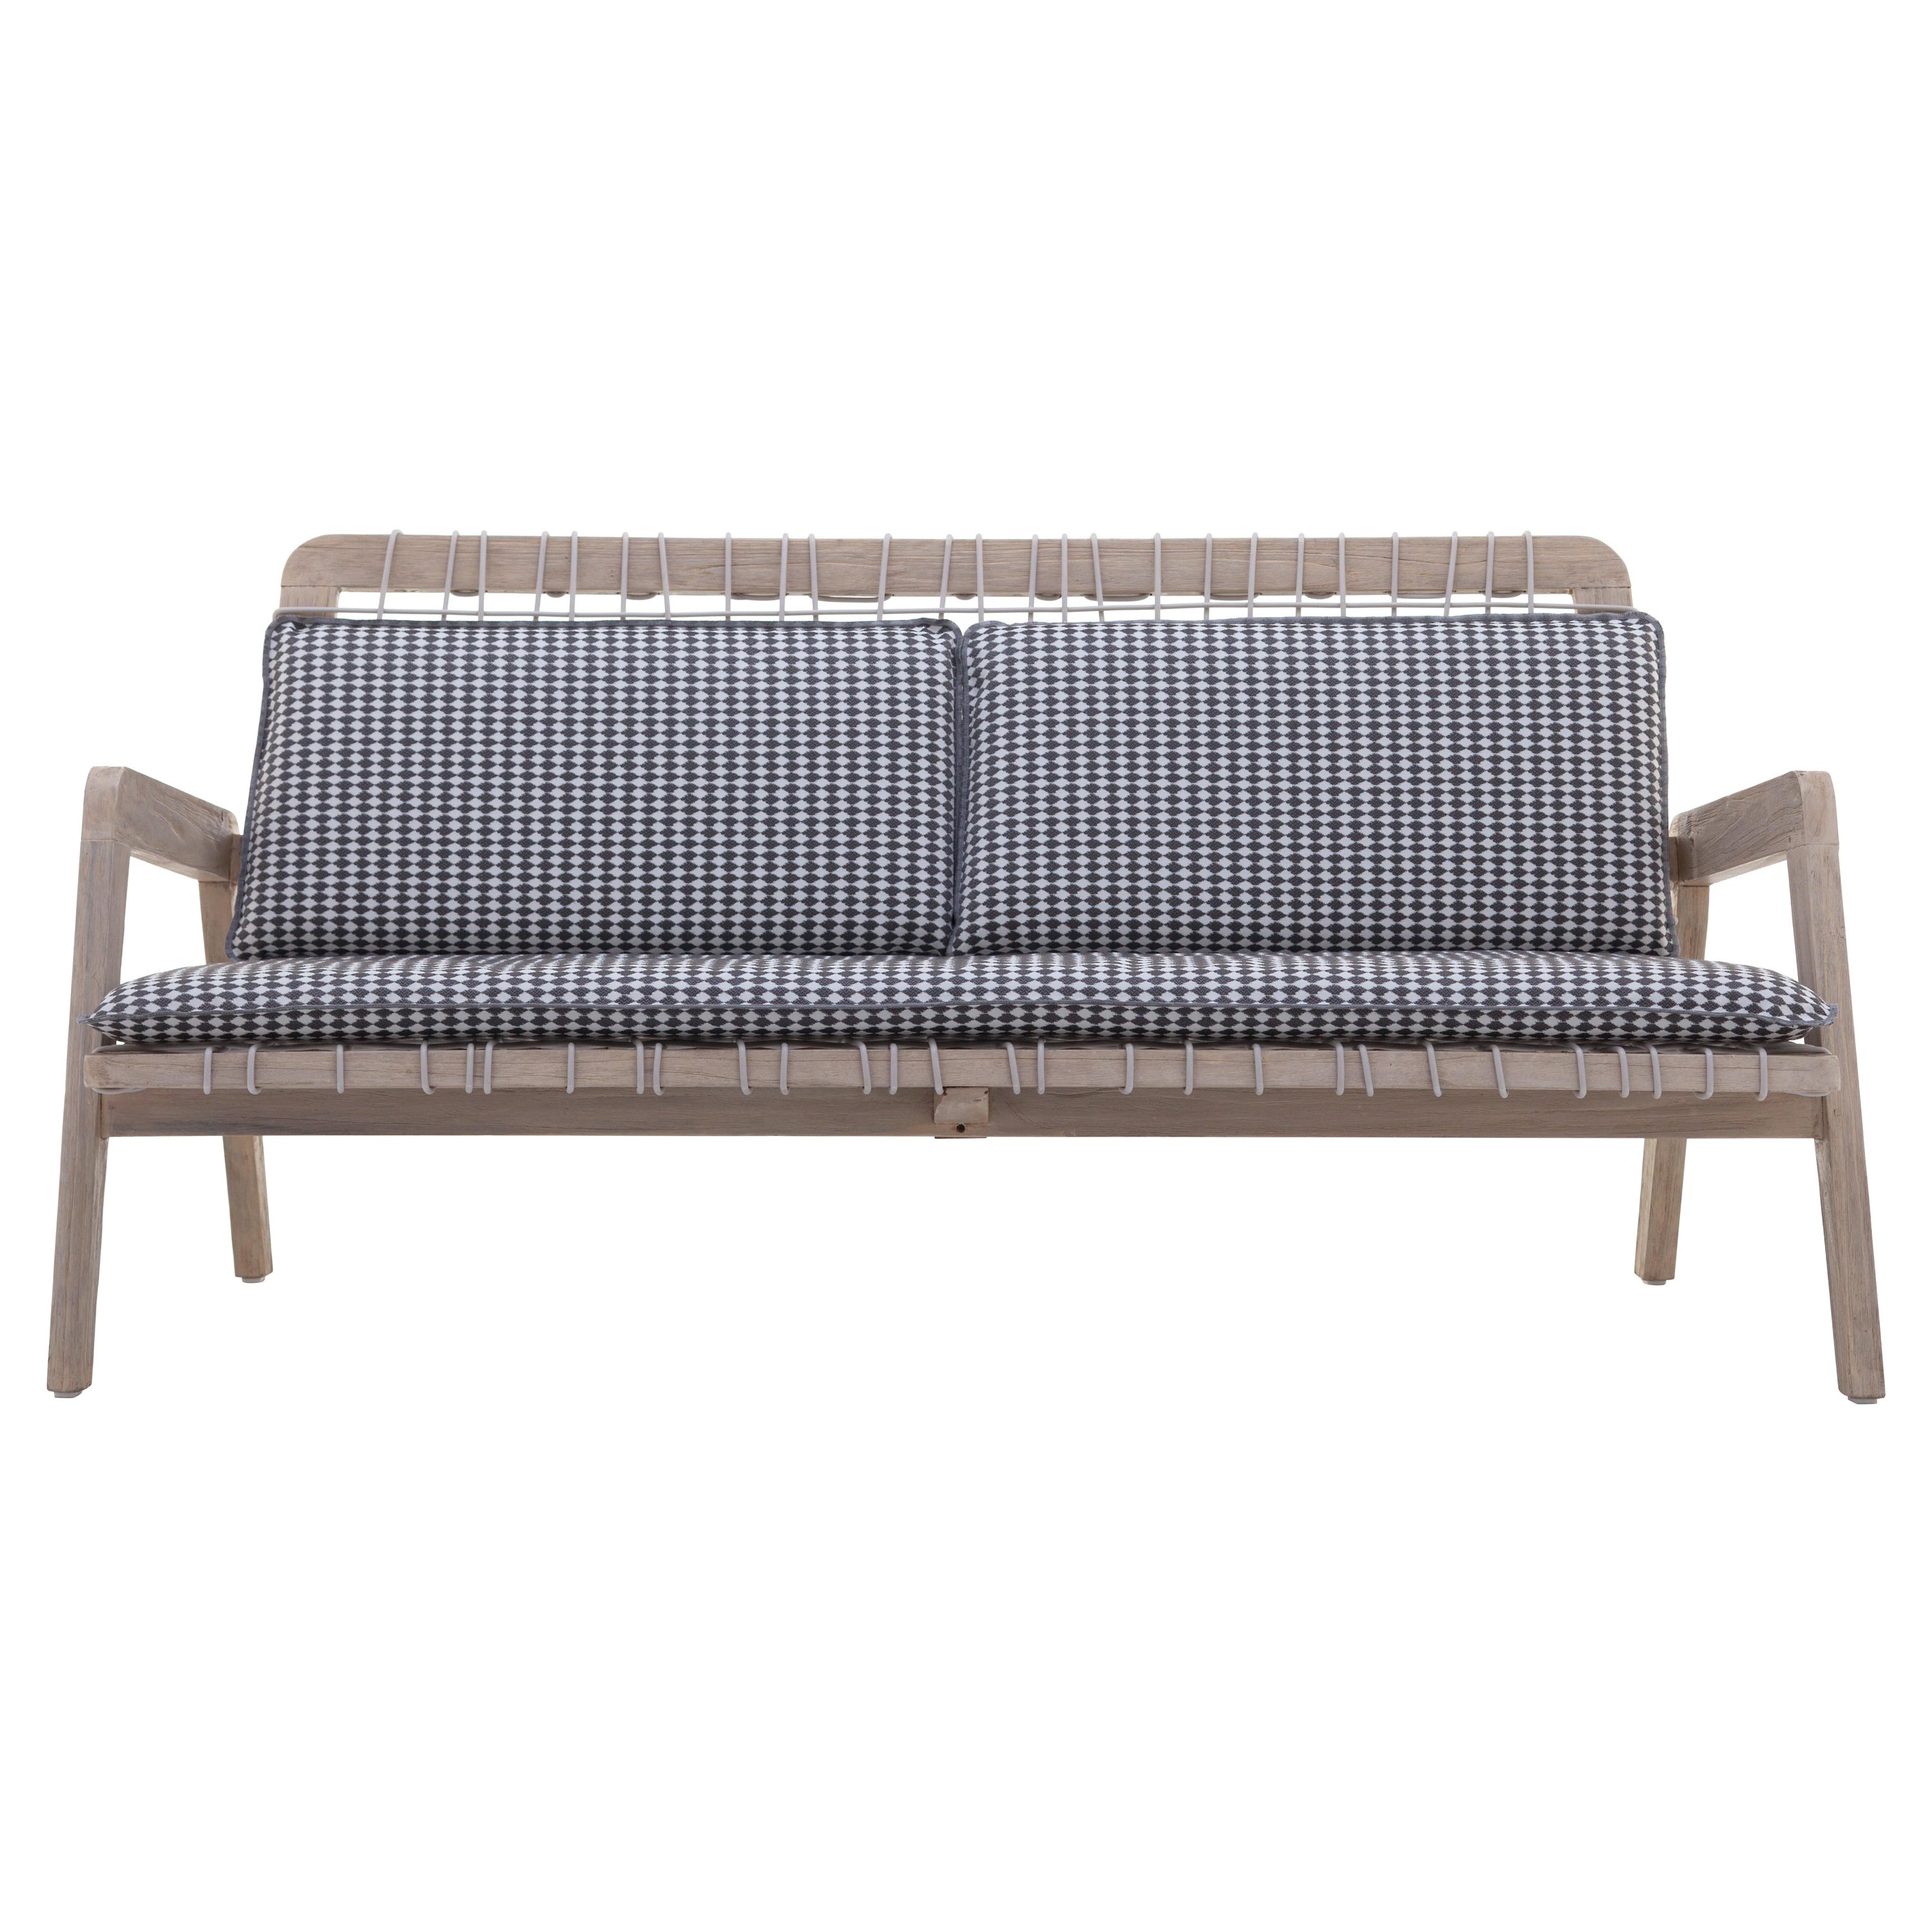 Gervasoni Inout Sofa in Lisboa 07 Upholstery and Aged Teak Frame with Woven For Sale